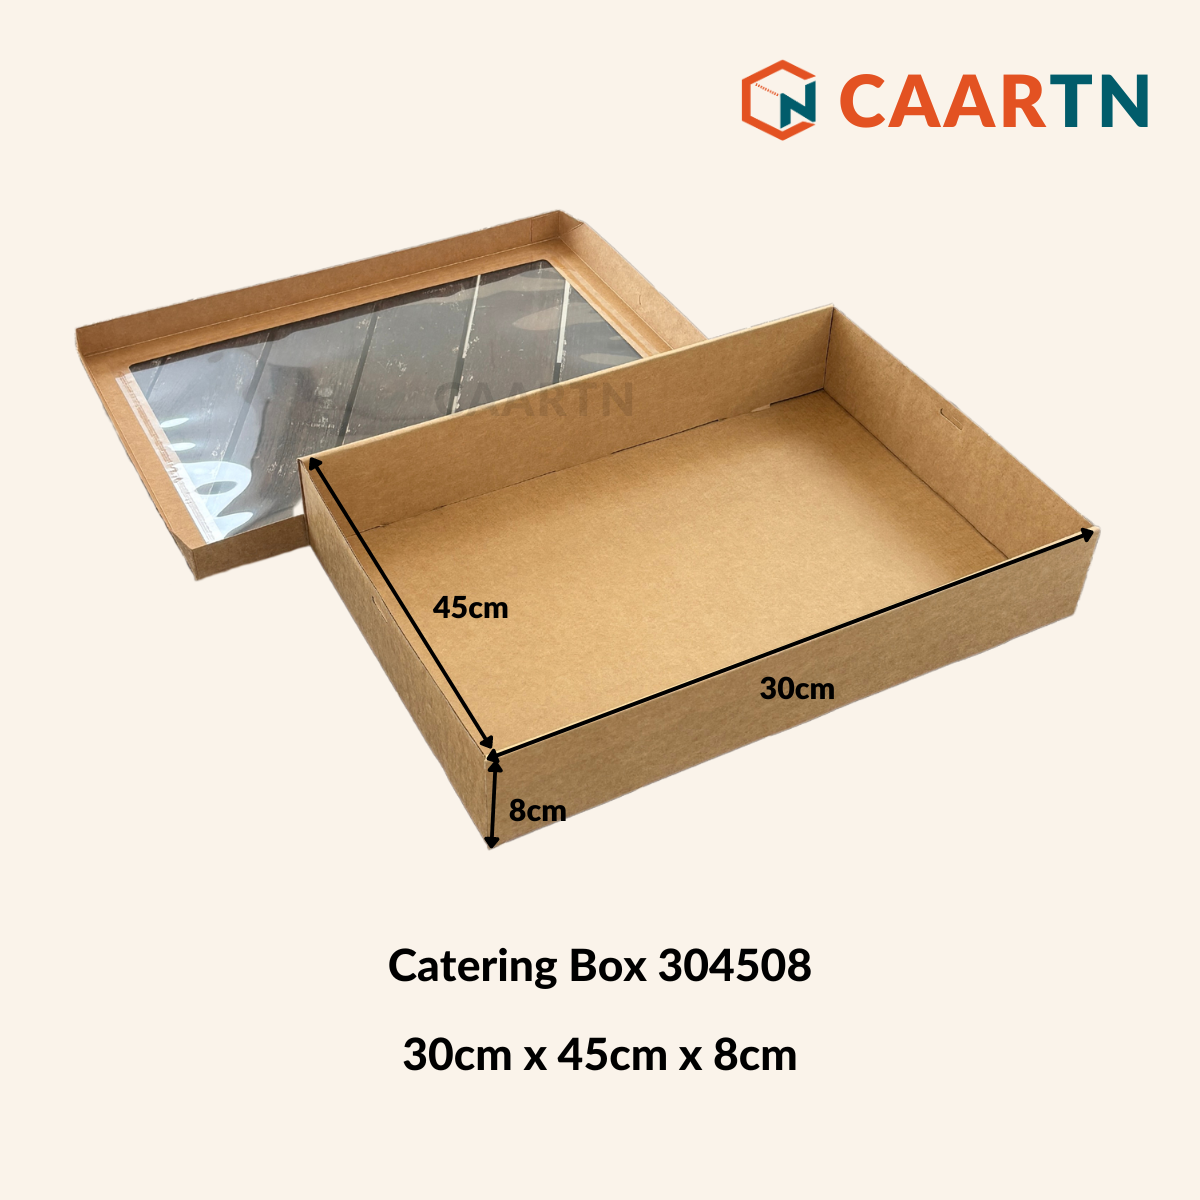 Catering Box 304508